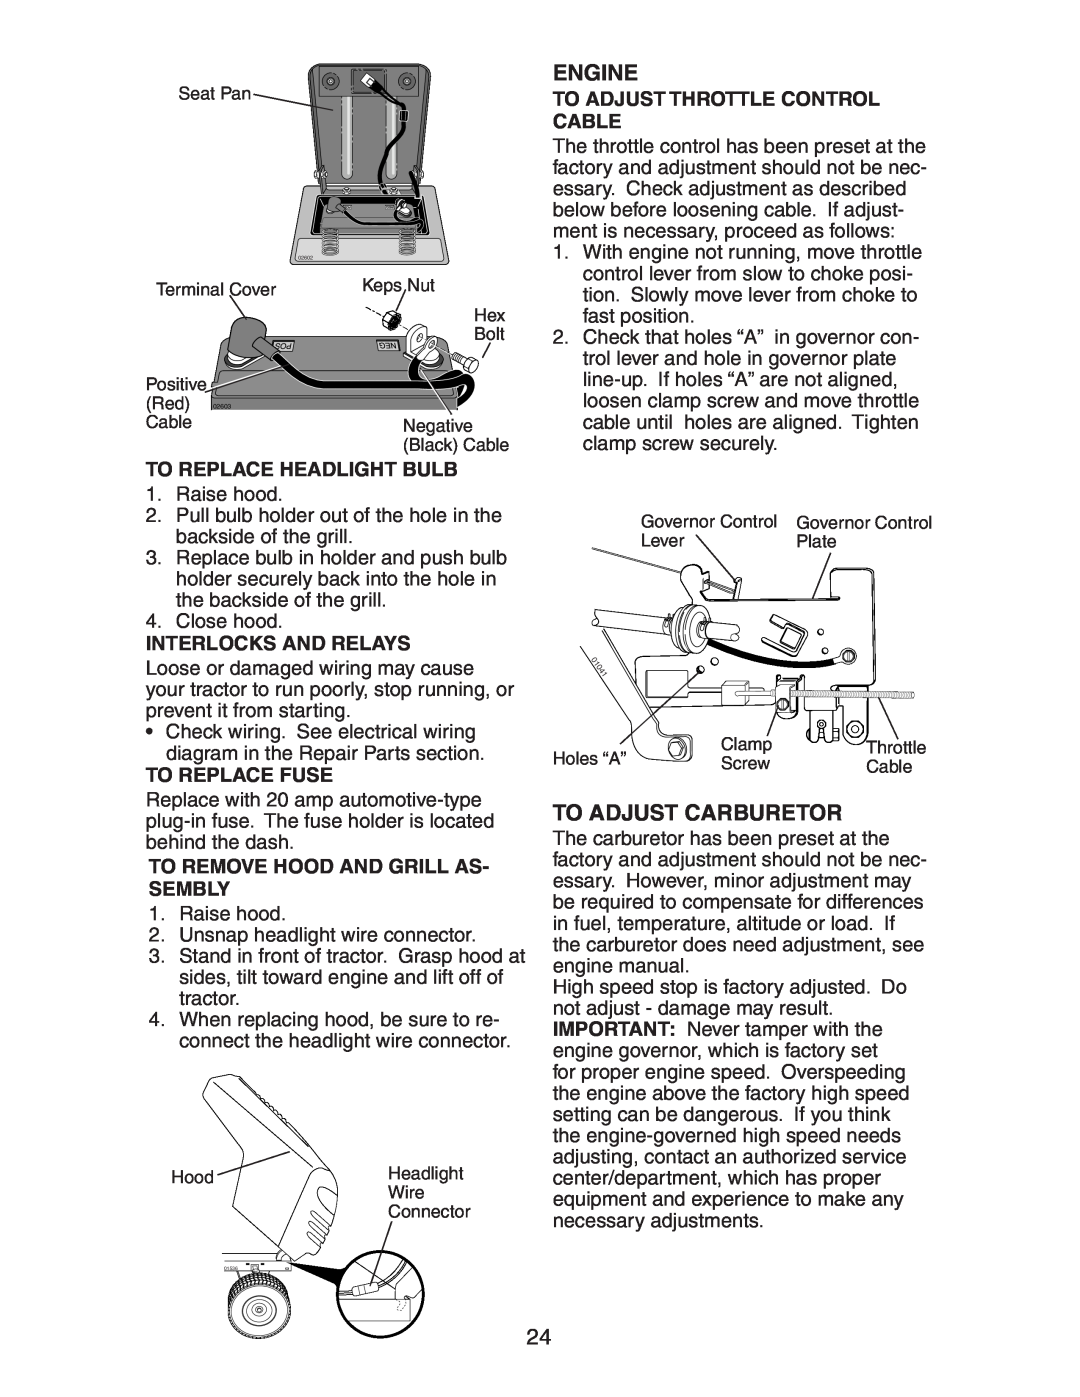 Poulan 271491 manual To Replace Headlight Bulb, Interlocks And Relays, To Replace Fuse, To Remove Hood And Grill As- Sembly 